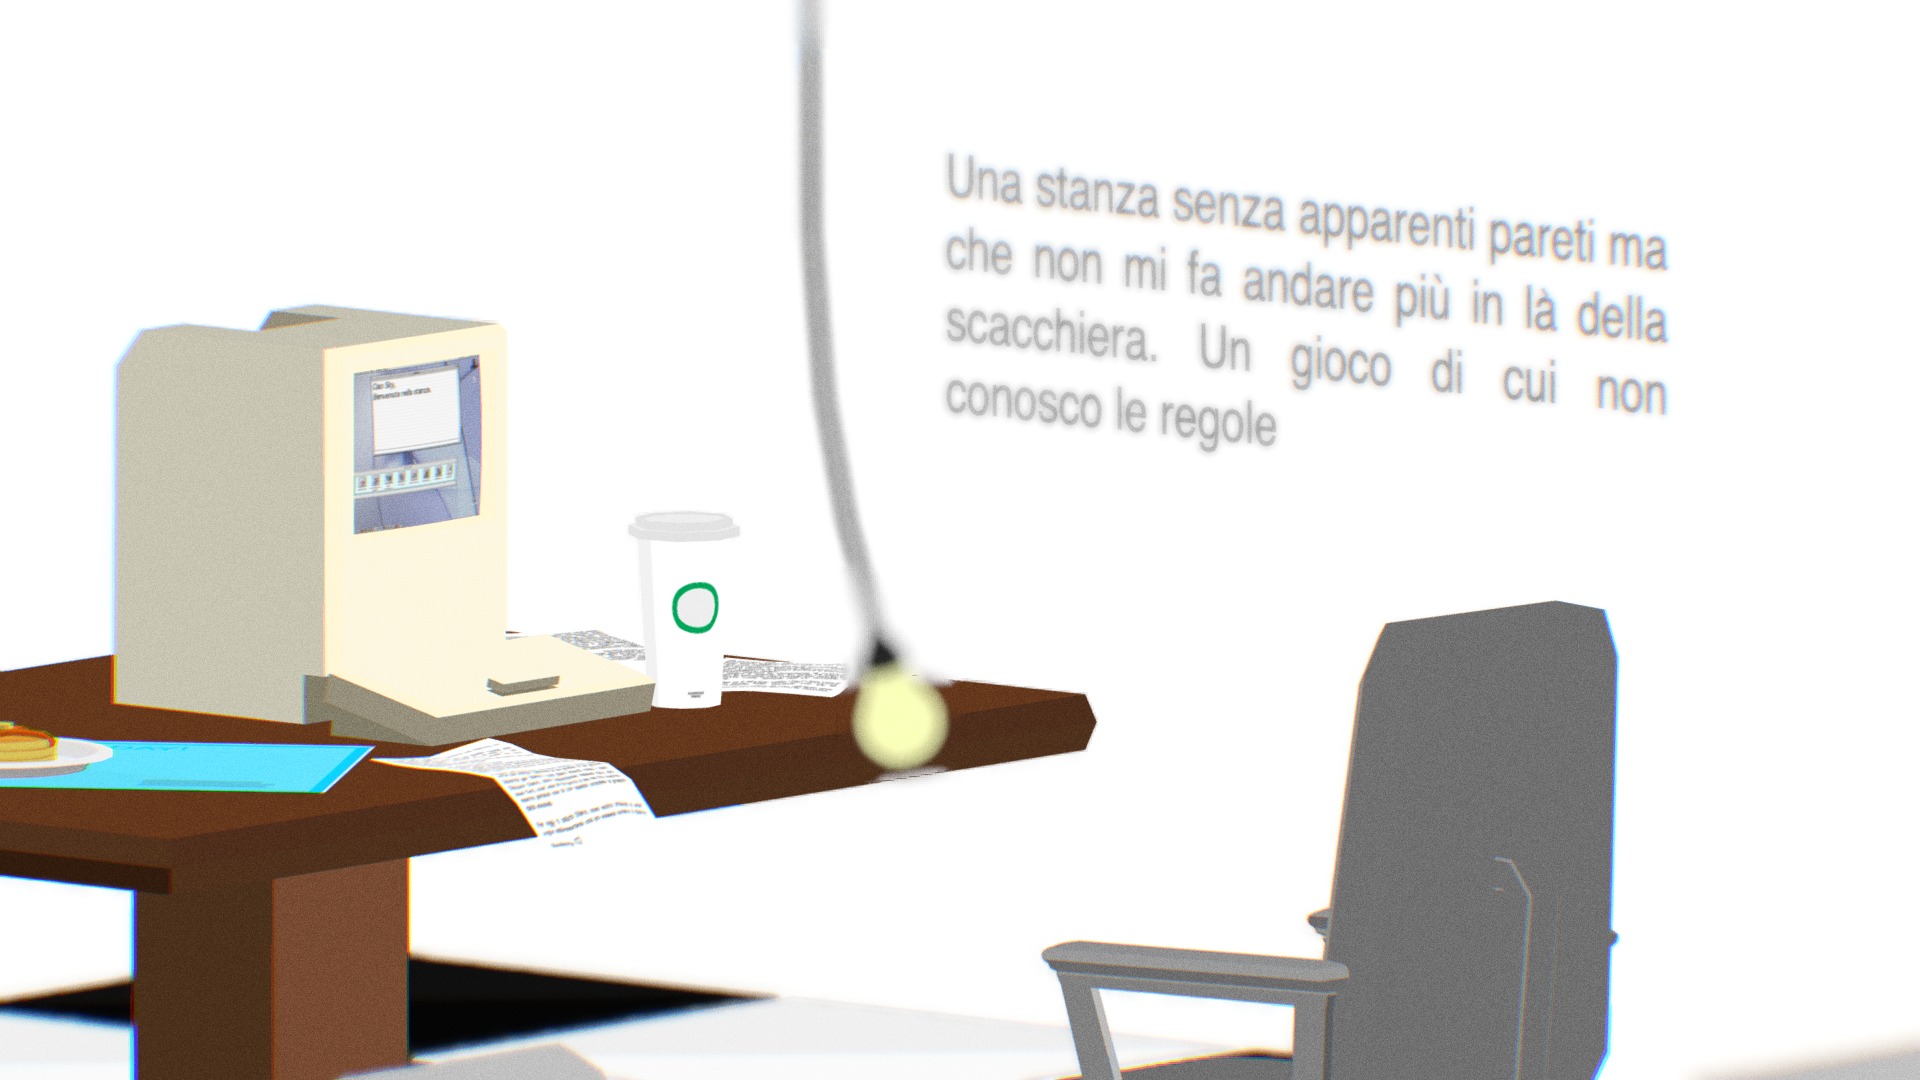 3D model La prima stanza - This is a 3D model of the La prima stanza. The 3D model is about a desk with a computer and a chair.